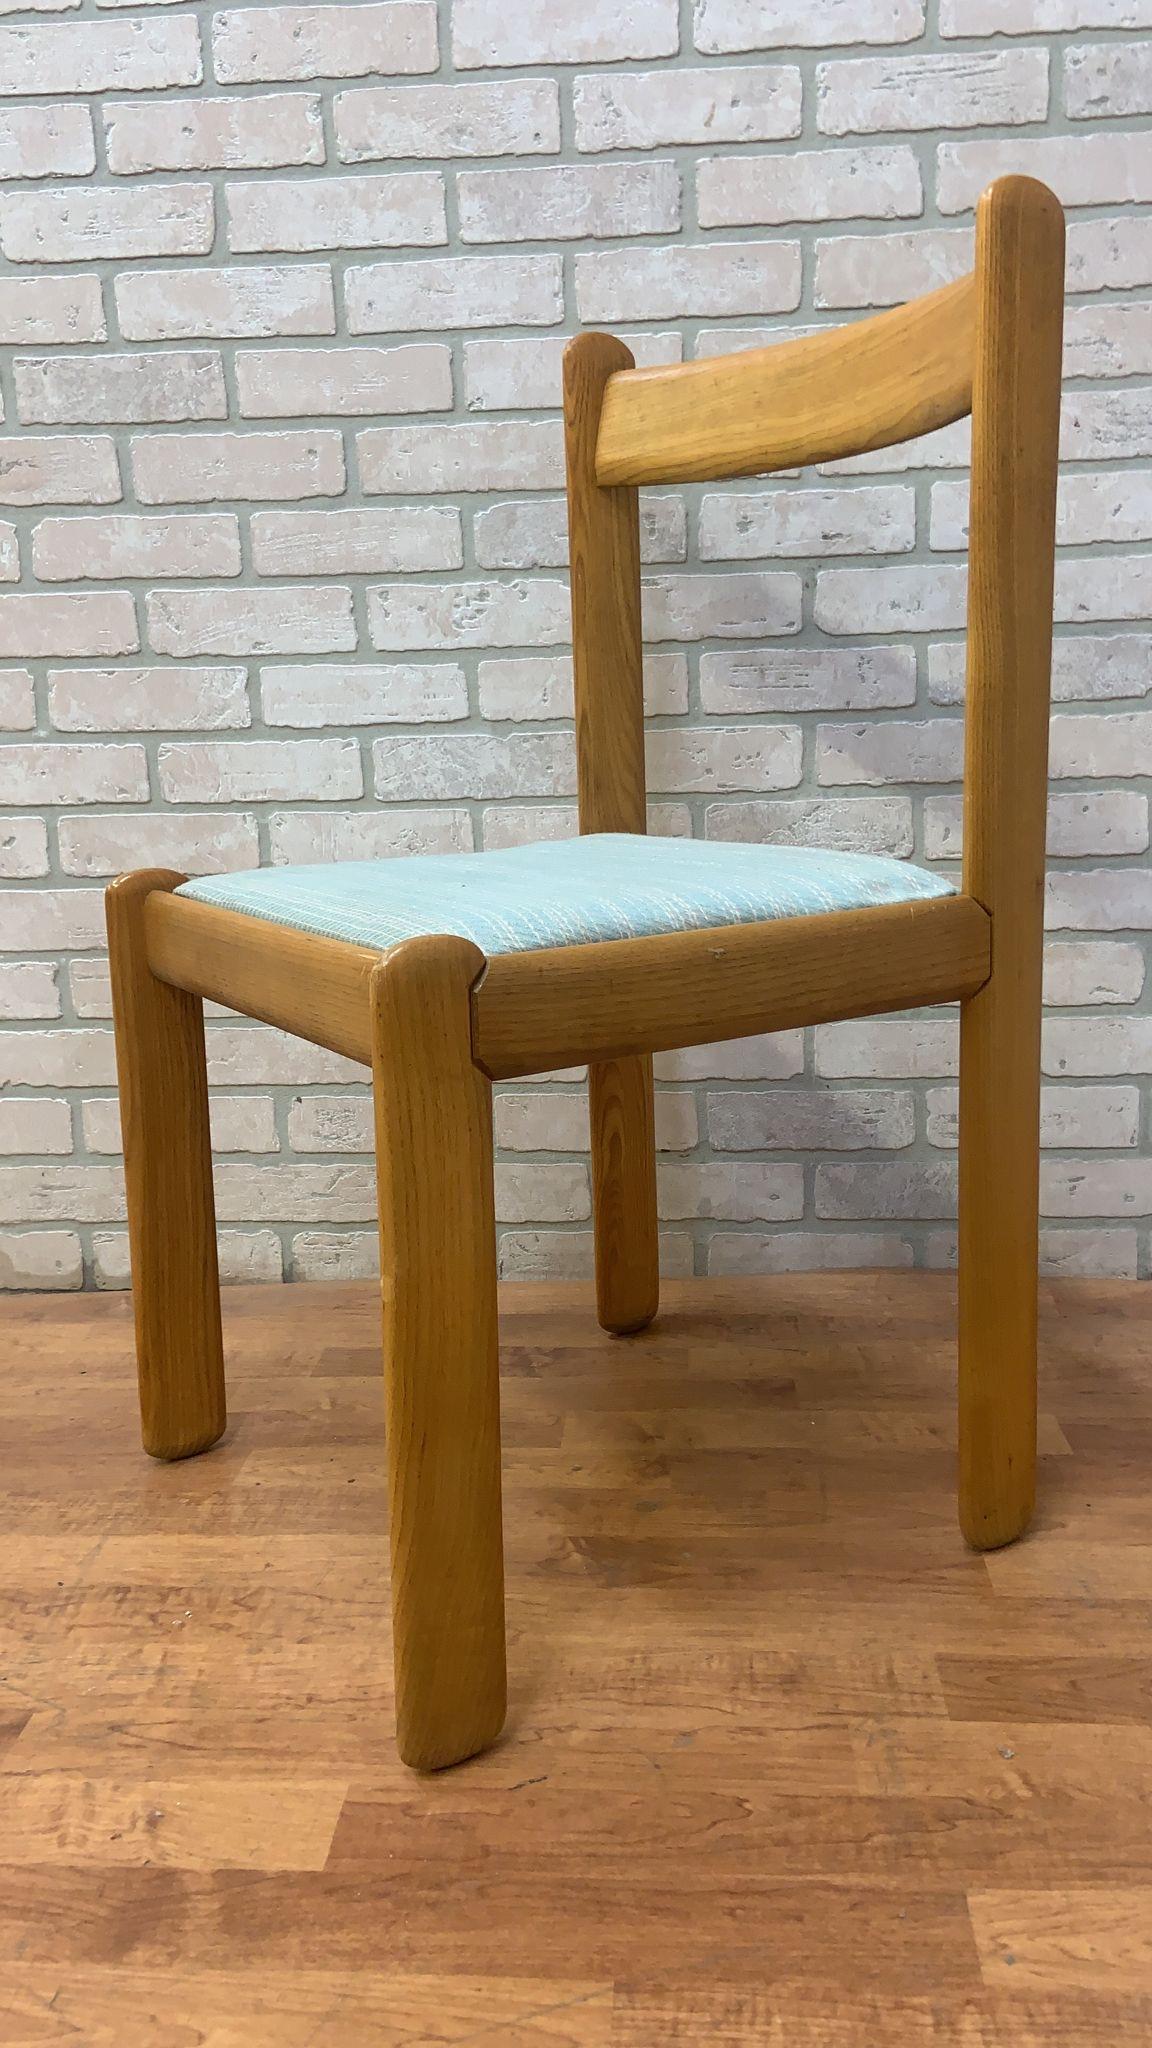 Vintage Italian Modern Vico Magistretti Style Blonde Beech Wood Chairs -Set of 4 For Sale 4